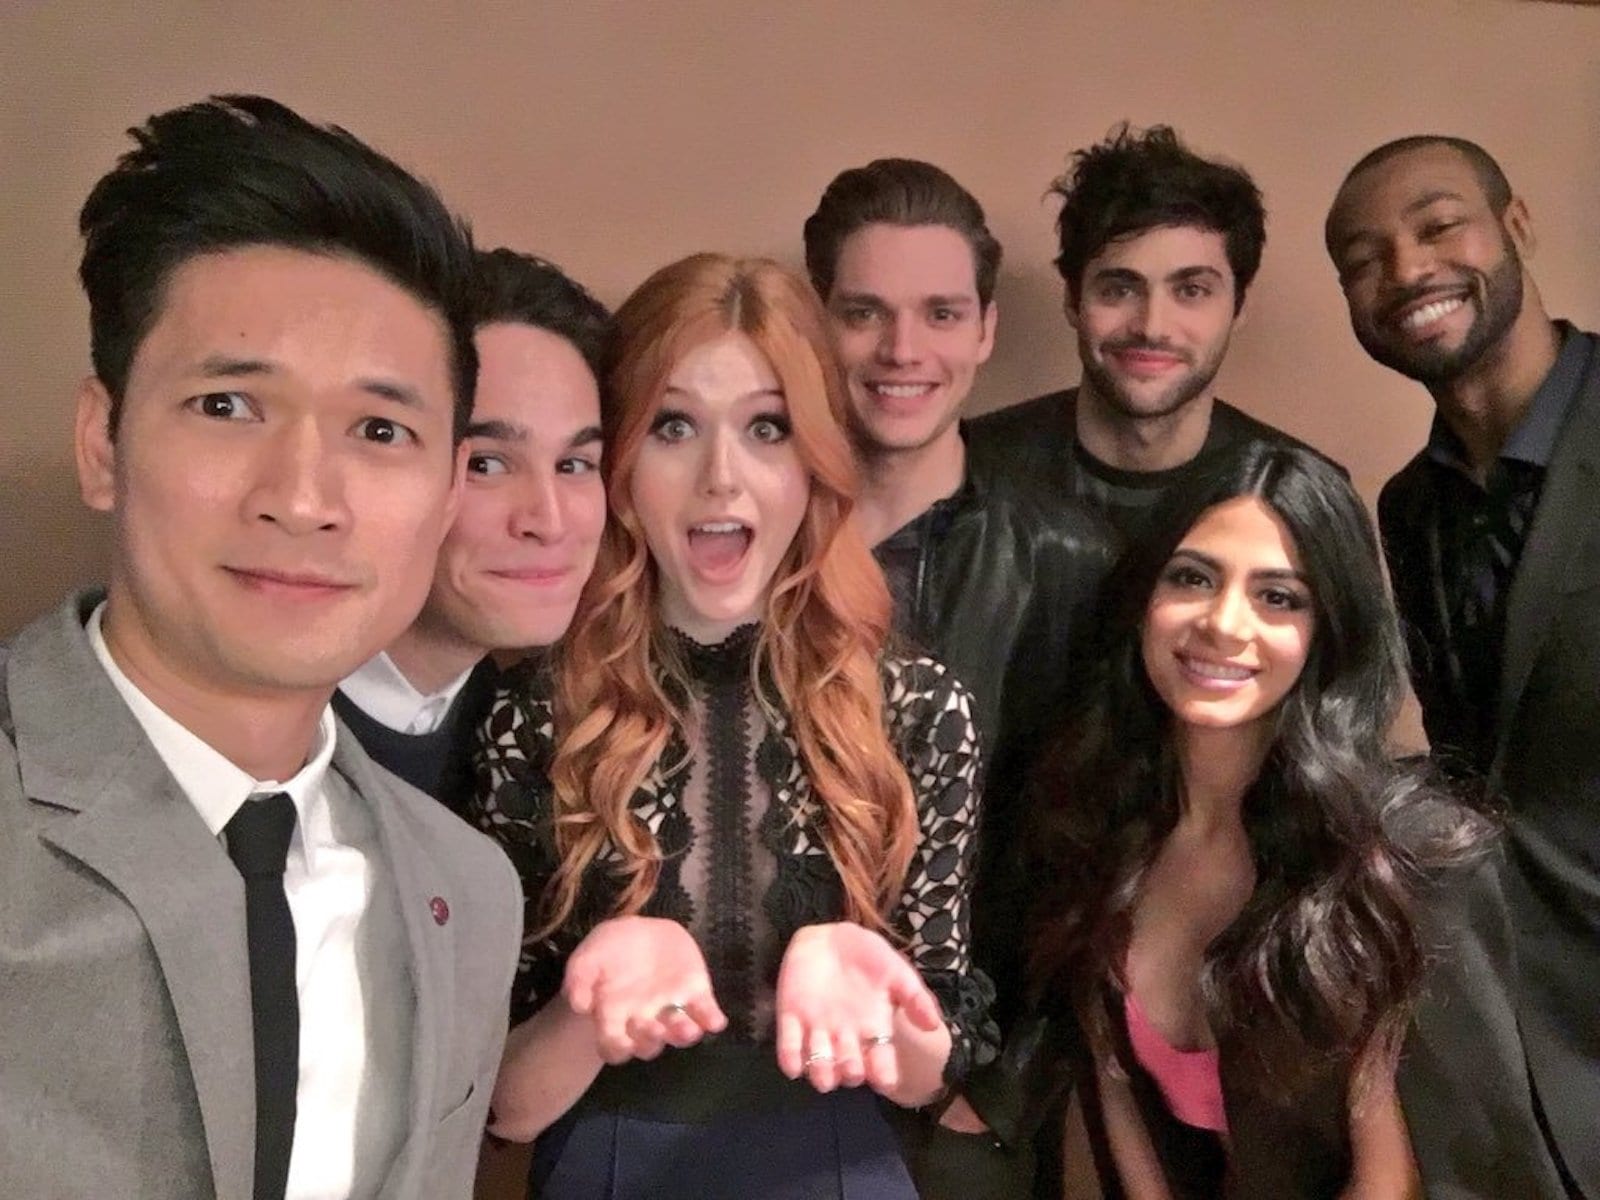 'Shadowhunters' is a wrap, but a potential future awaits. 'Shadowhunters' cast members shared their love for the fans of the cult Freeform show.